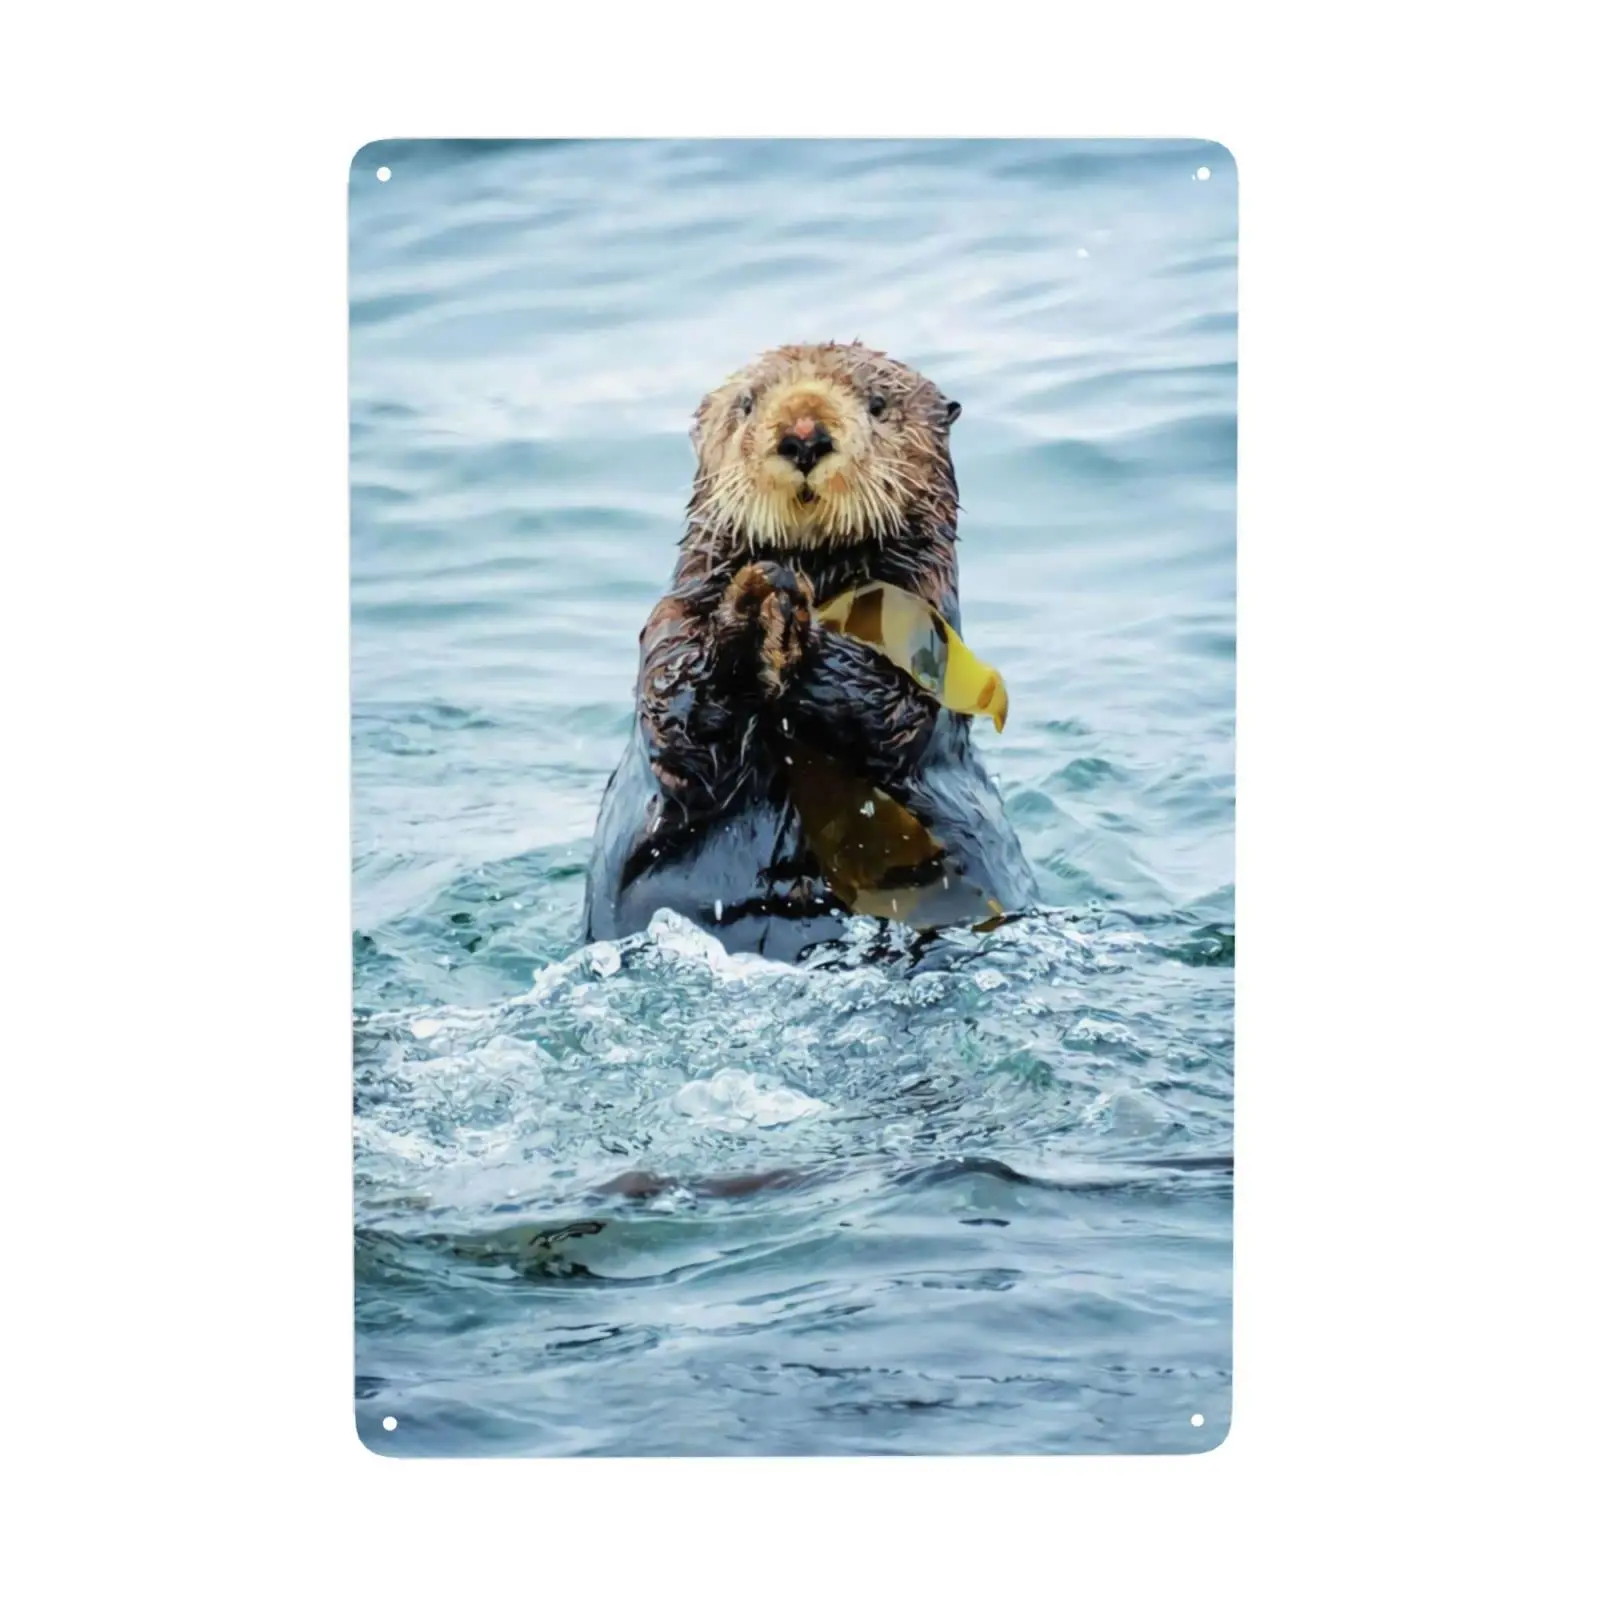 

Otter Poster Metal Sign Vintage Cute Bathroom Poster Home Bar Club Bedroom Wall Decoration 12x18 Inches